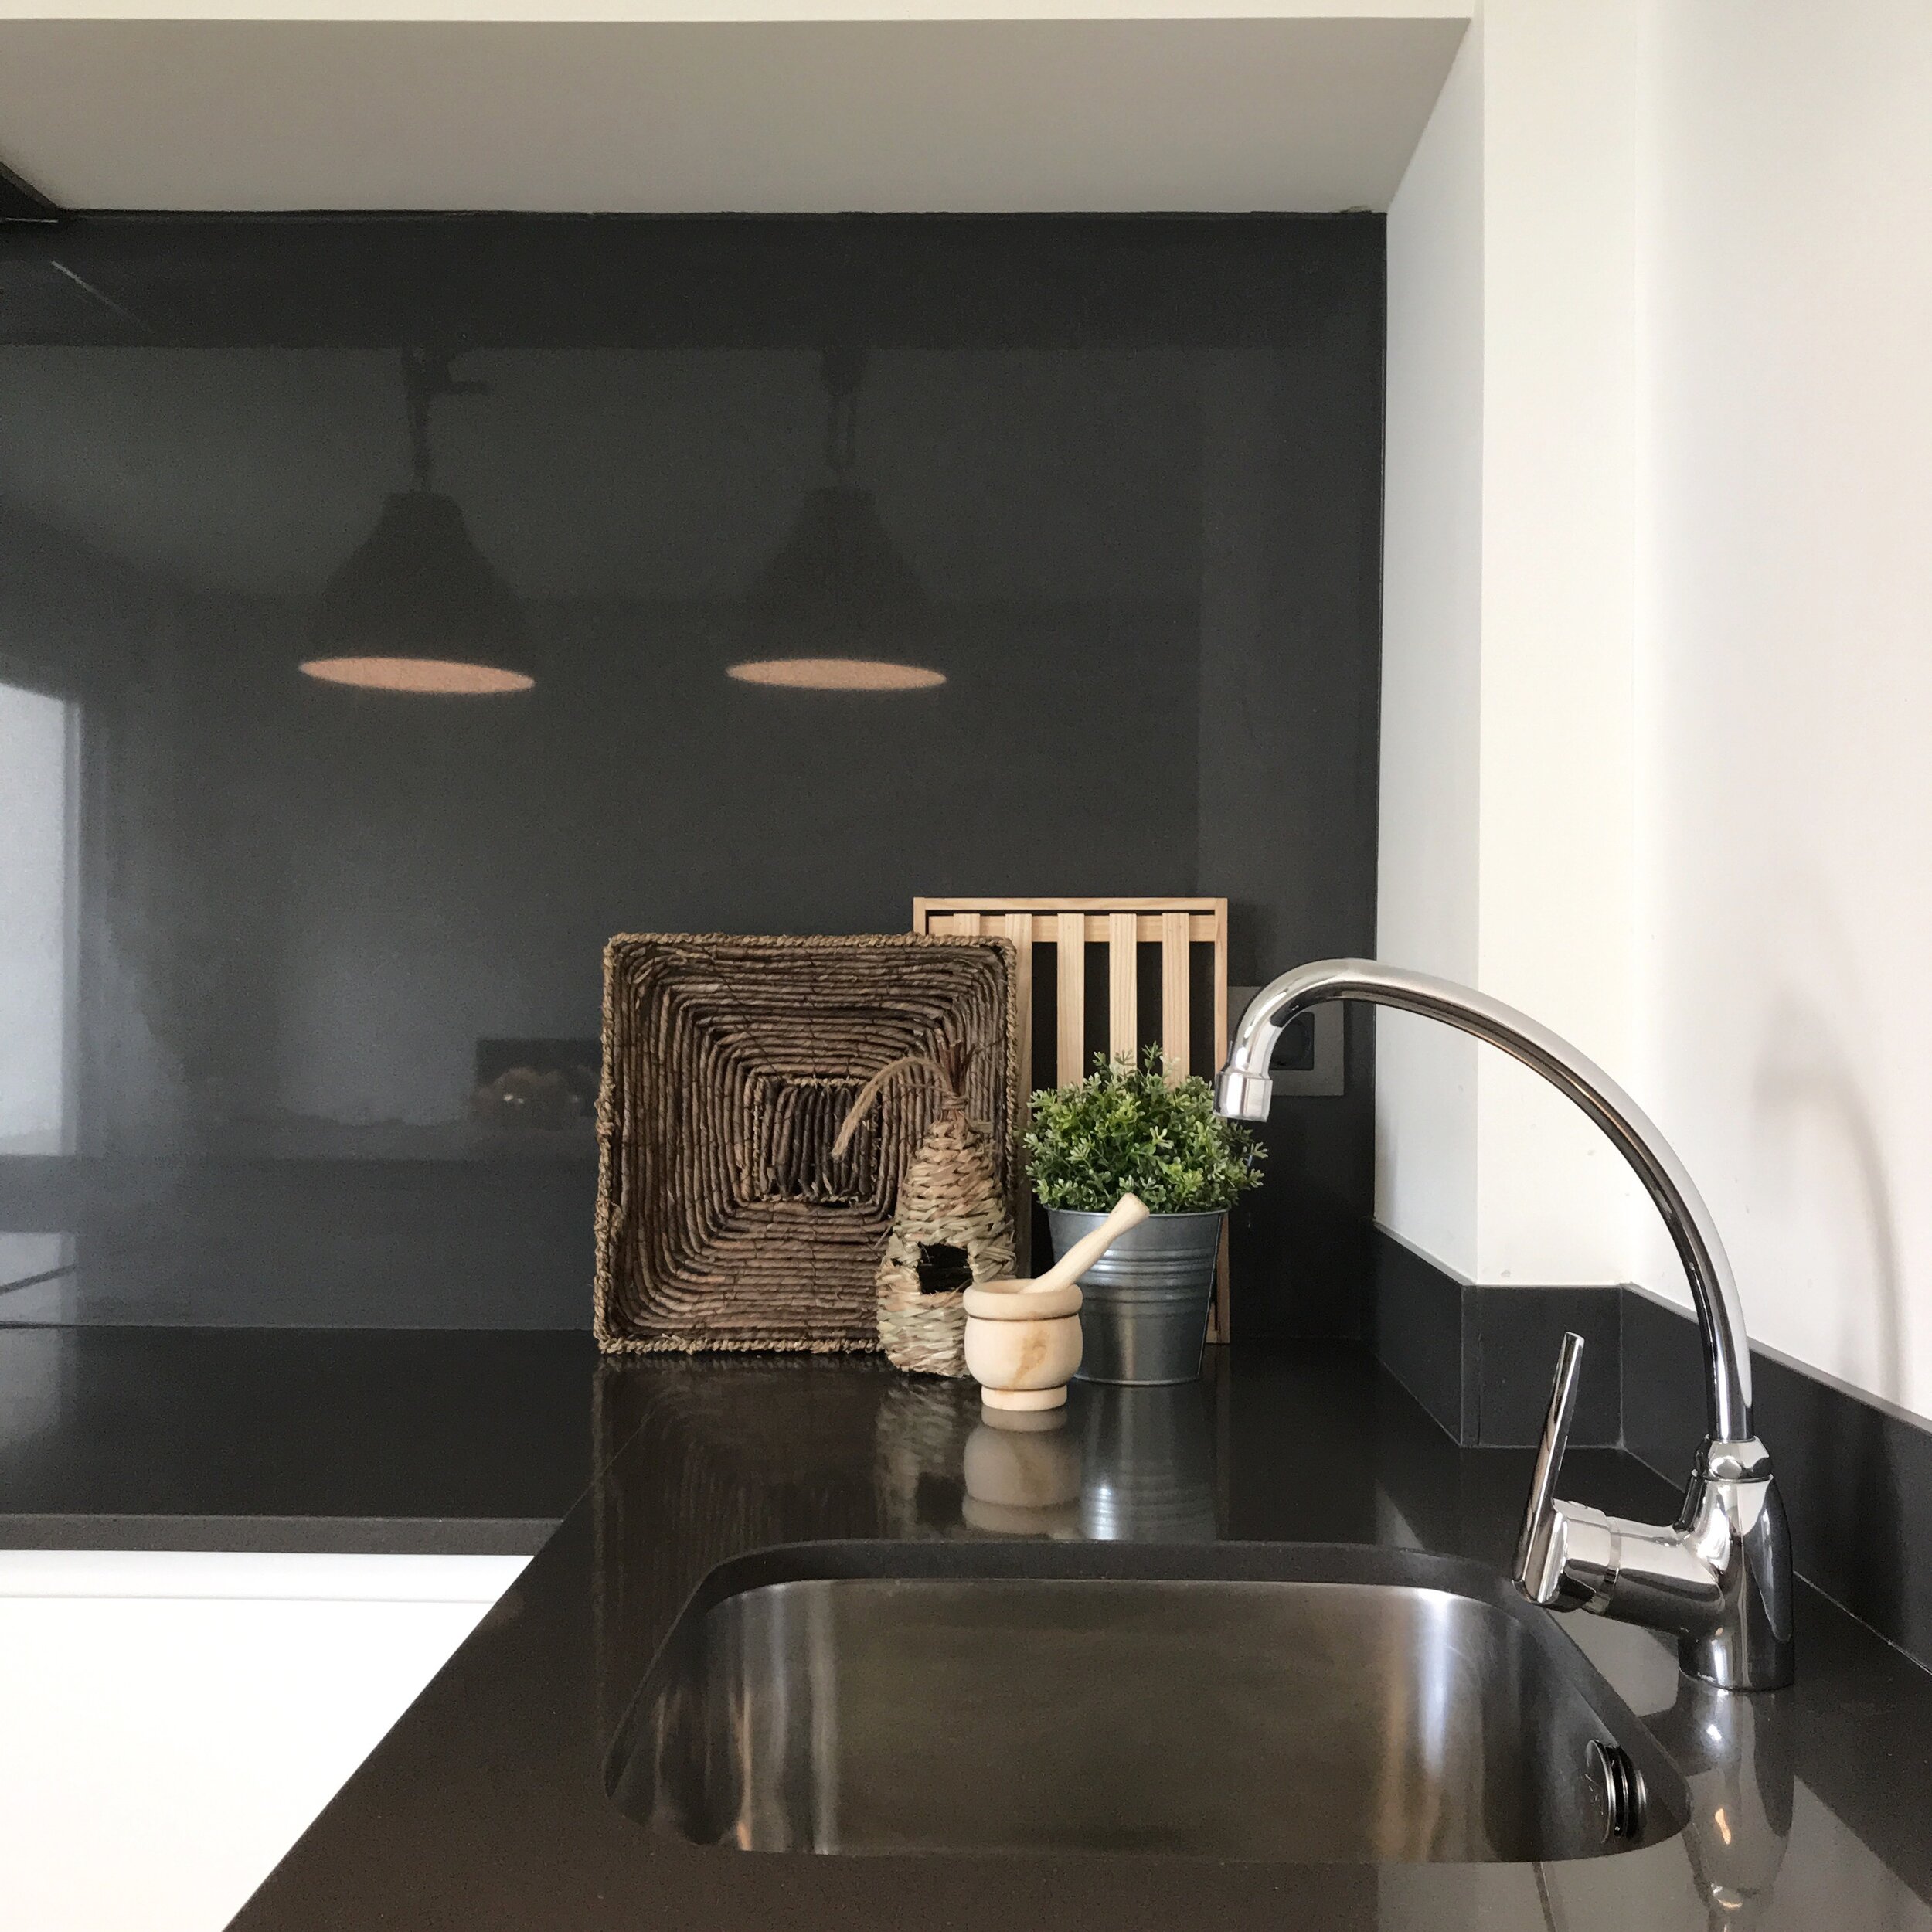 Image of a dark gray kitchen counter with stainless sink elegantly turns into the eating area.